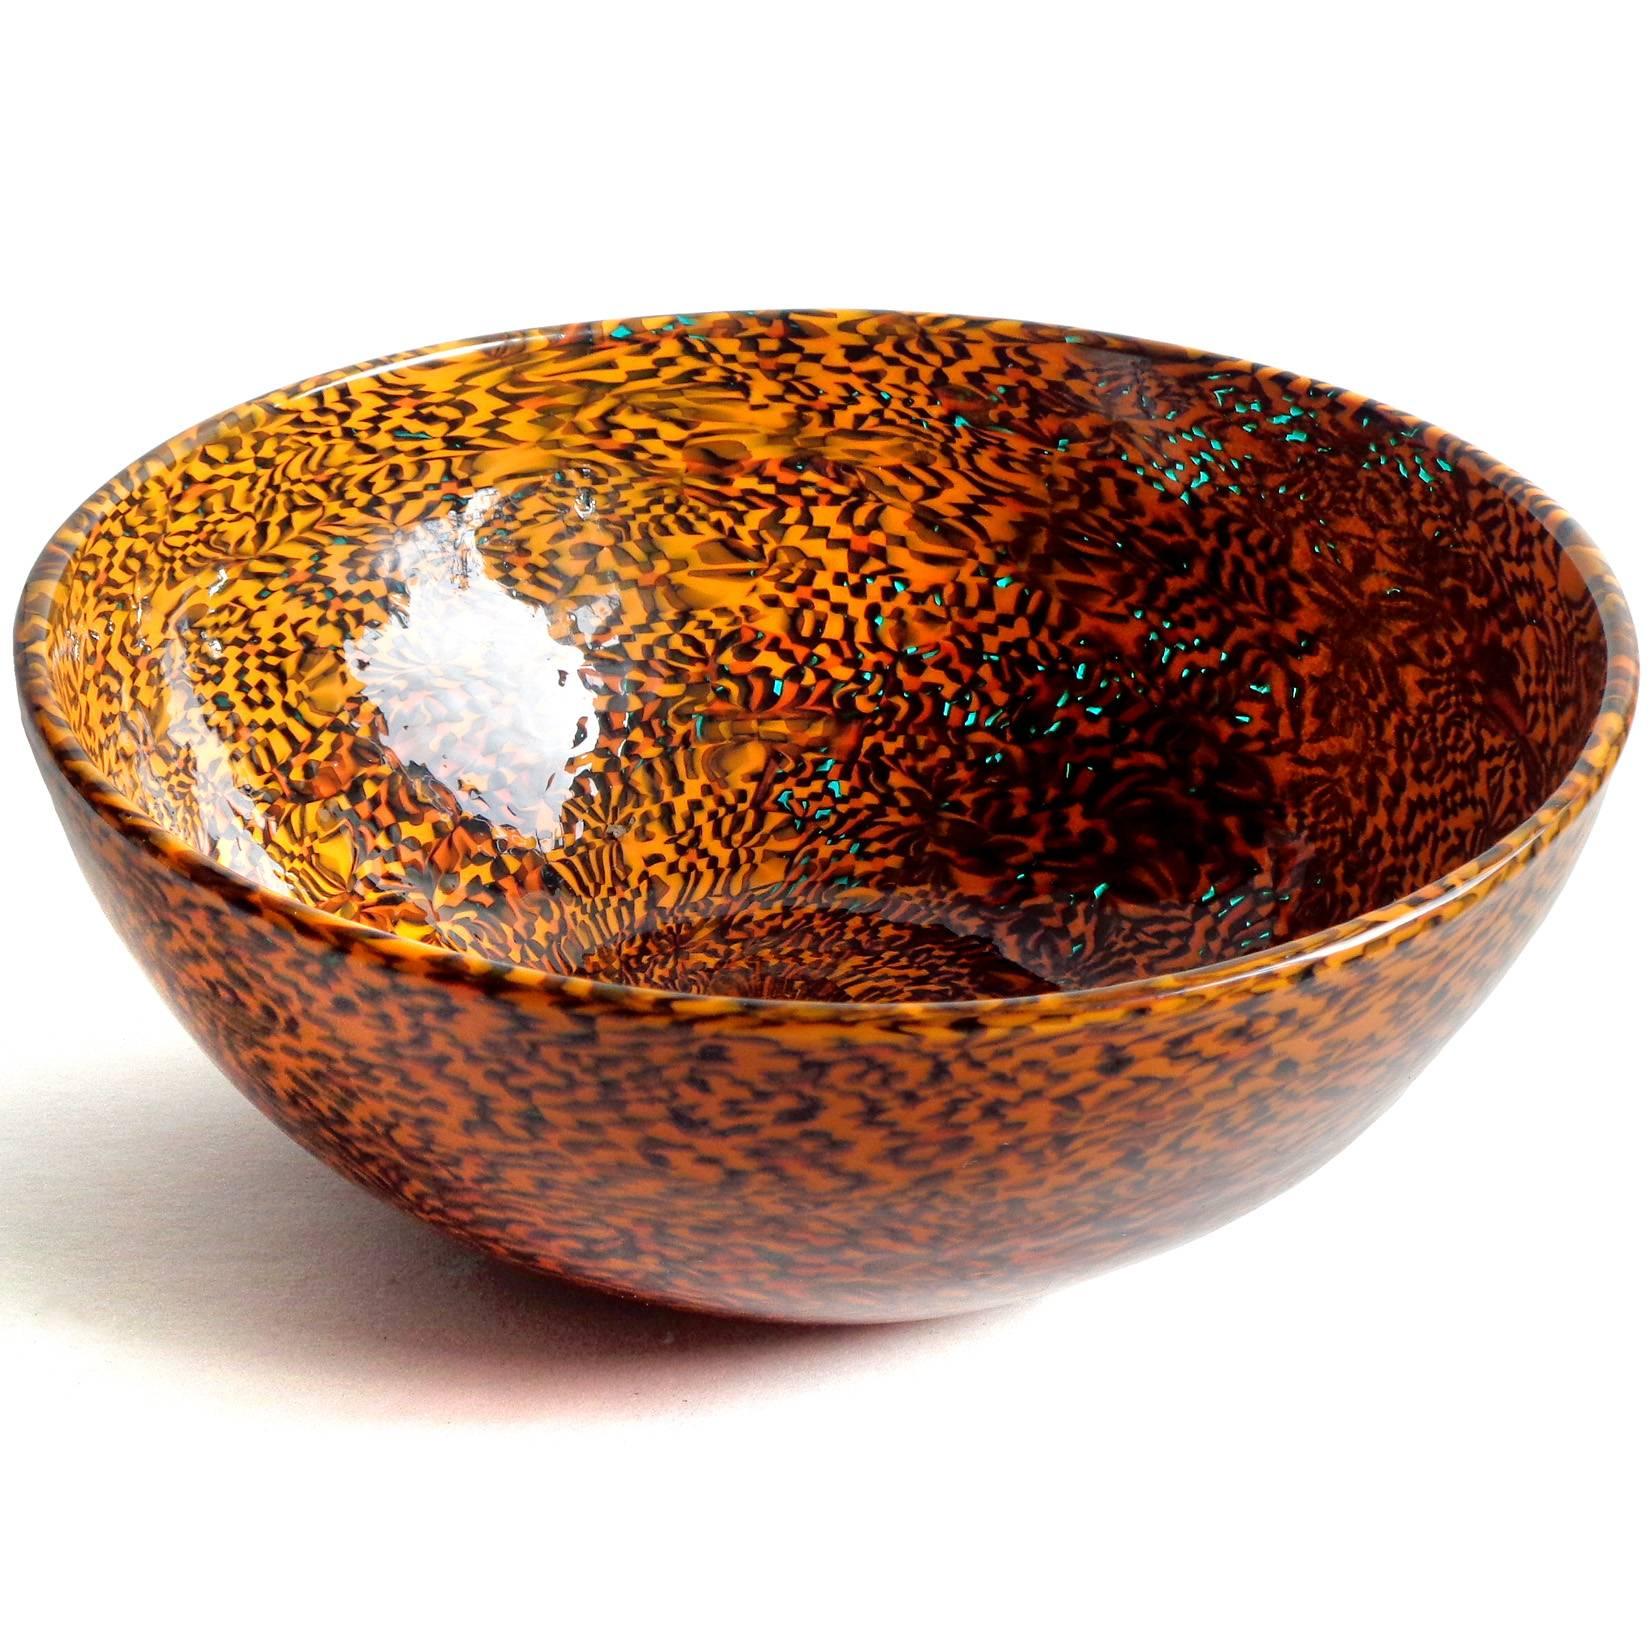 Free shipping worldwide! See details below description.

Rare and large Murano handblown orange and black murine art glass bowl. Documented to designer Paolo Venini, for Venini e Co., circa 1950s. The piece has an unusual blended checkered design.